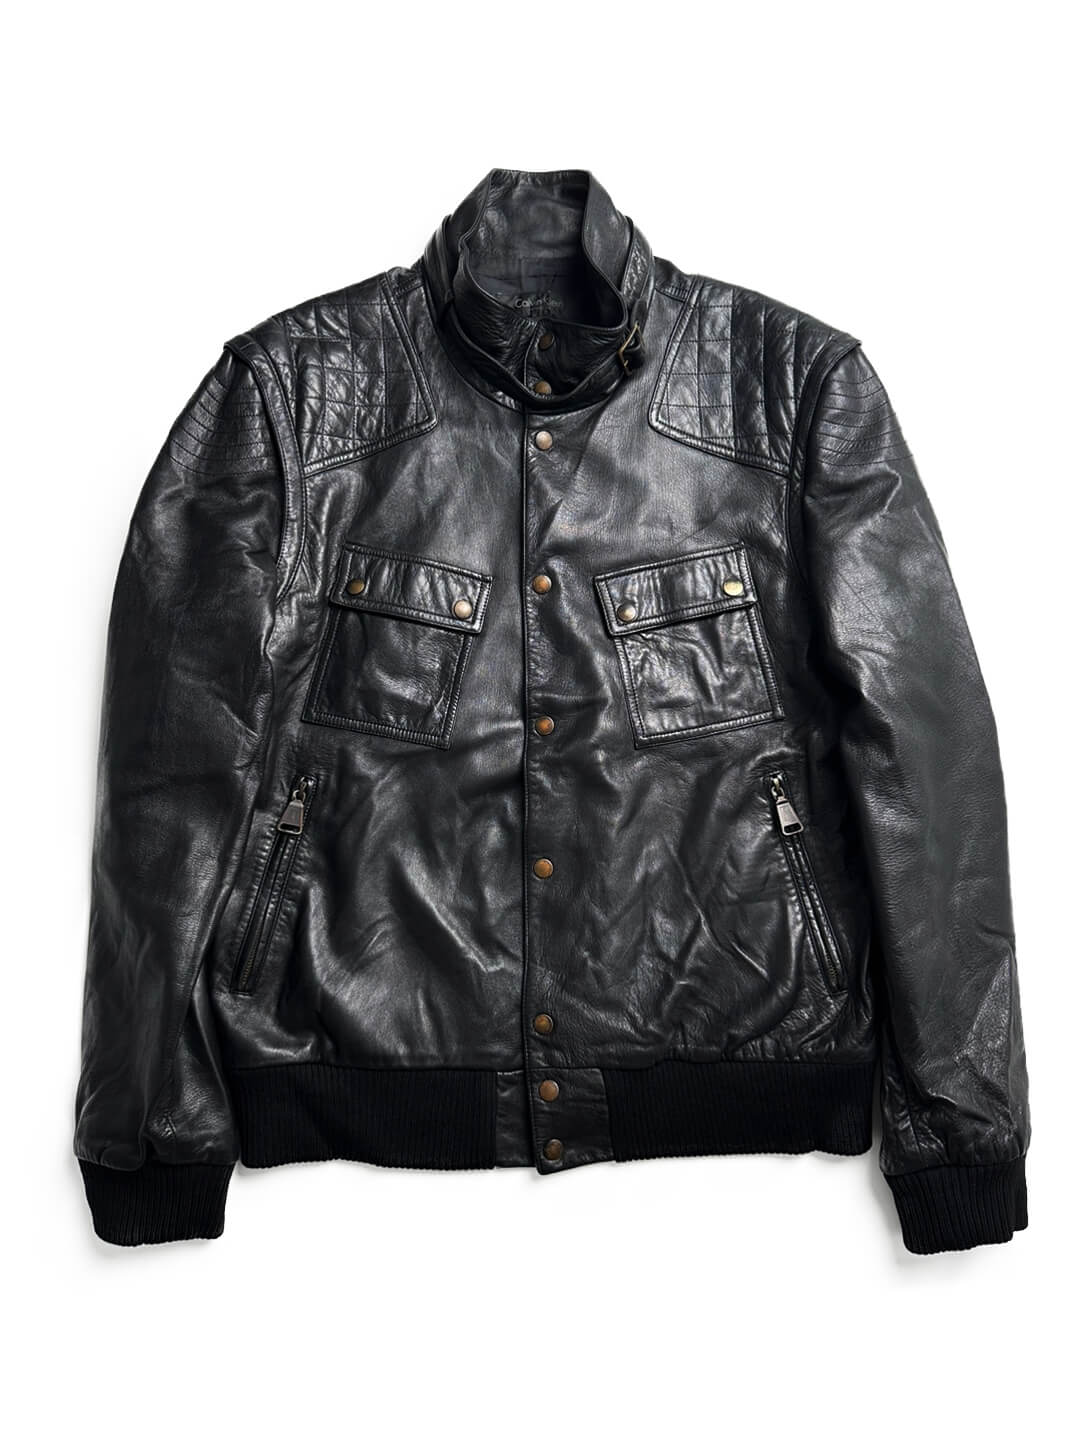 Calvin Klein collection 2010s leather jacket